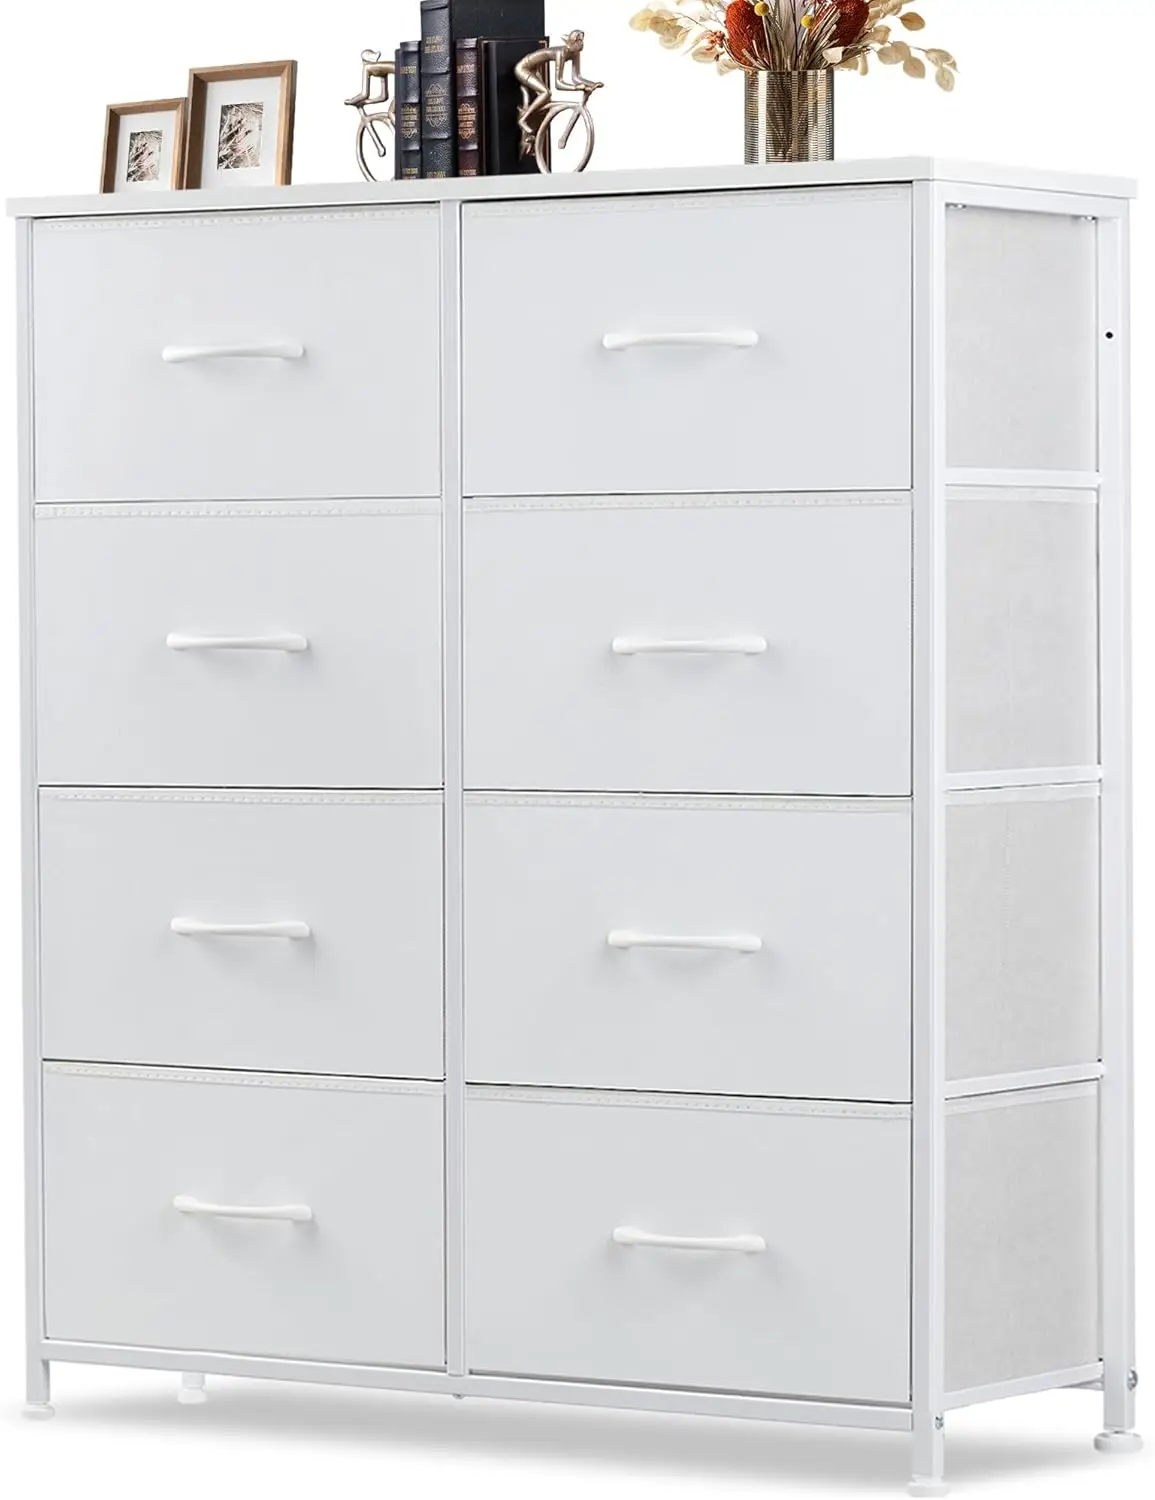 

Dresser for Bedroom, 8 Storage Drawers, Tall Fabric Closet Chests Organizer Tower Furniture with Wooden Top Metal Frame